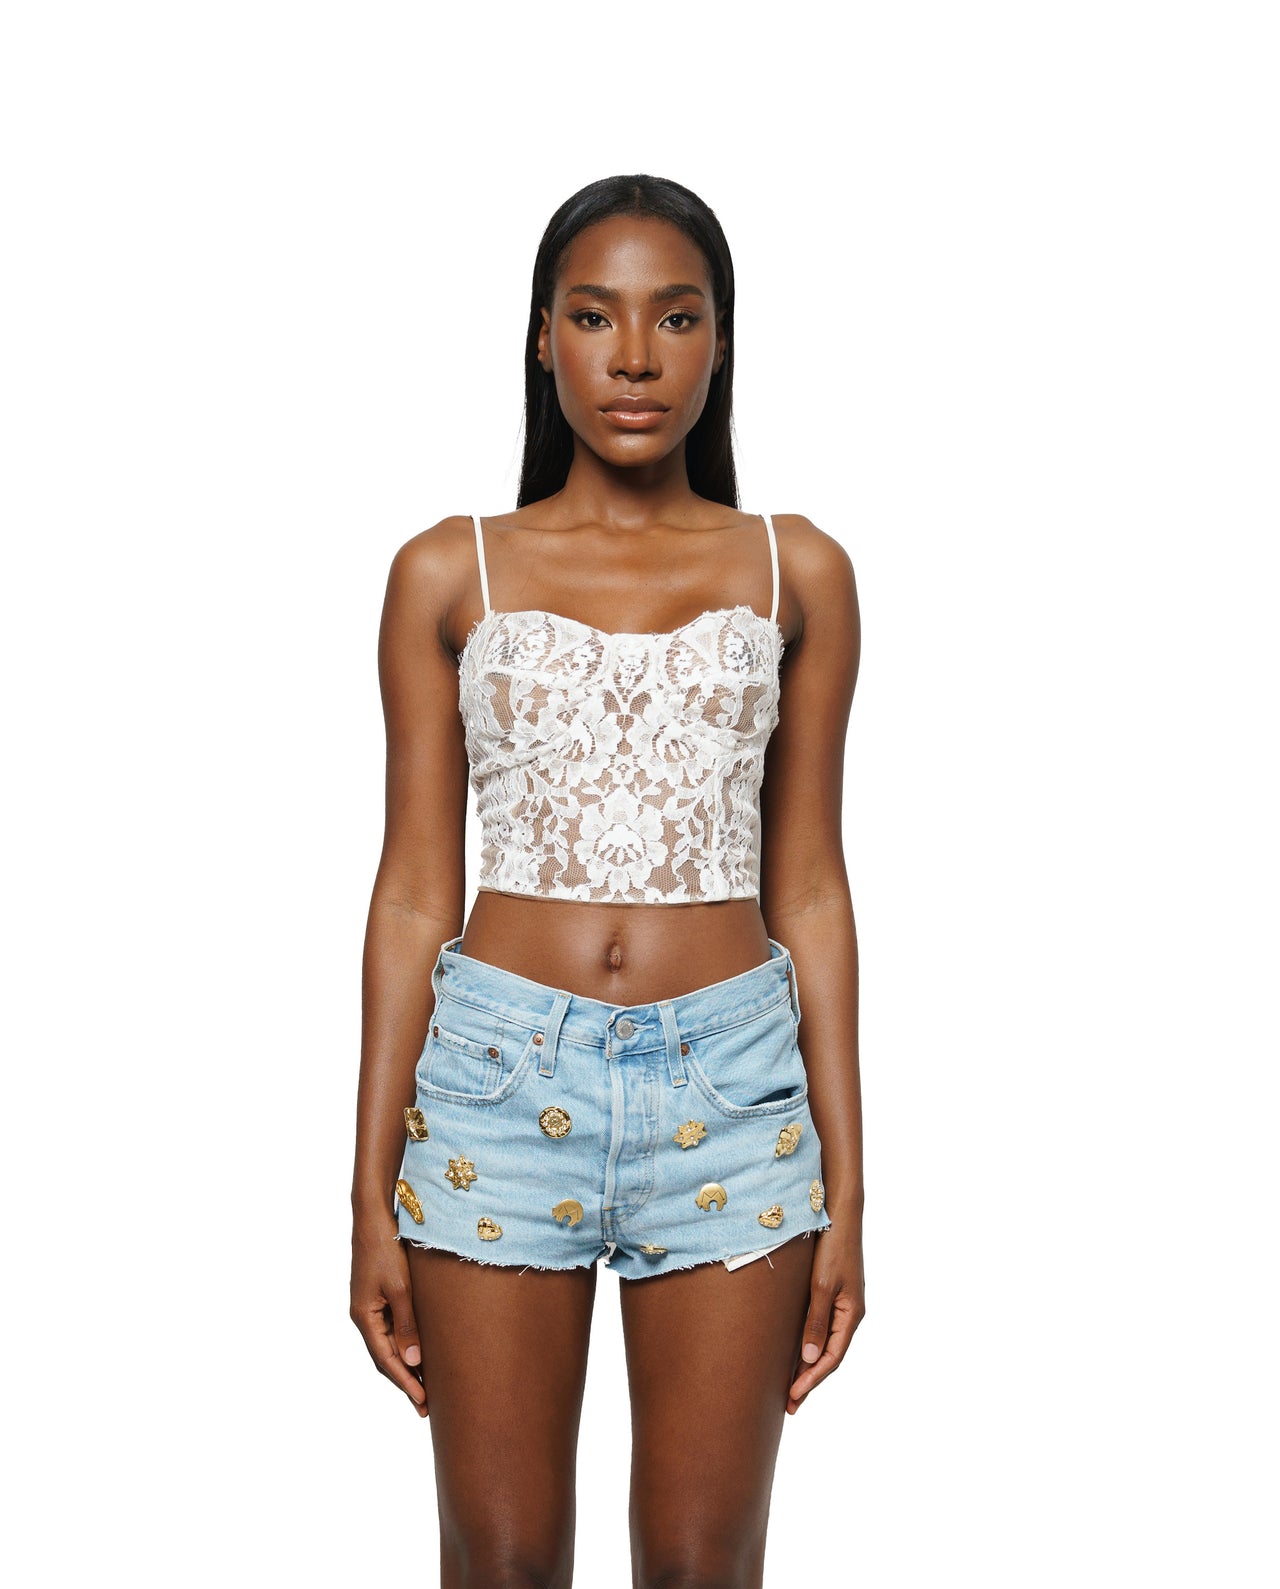 FRENCH LACE BODYSUIT - Lurelly